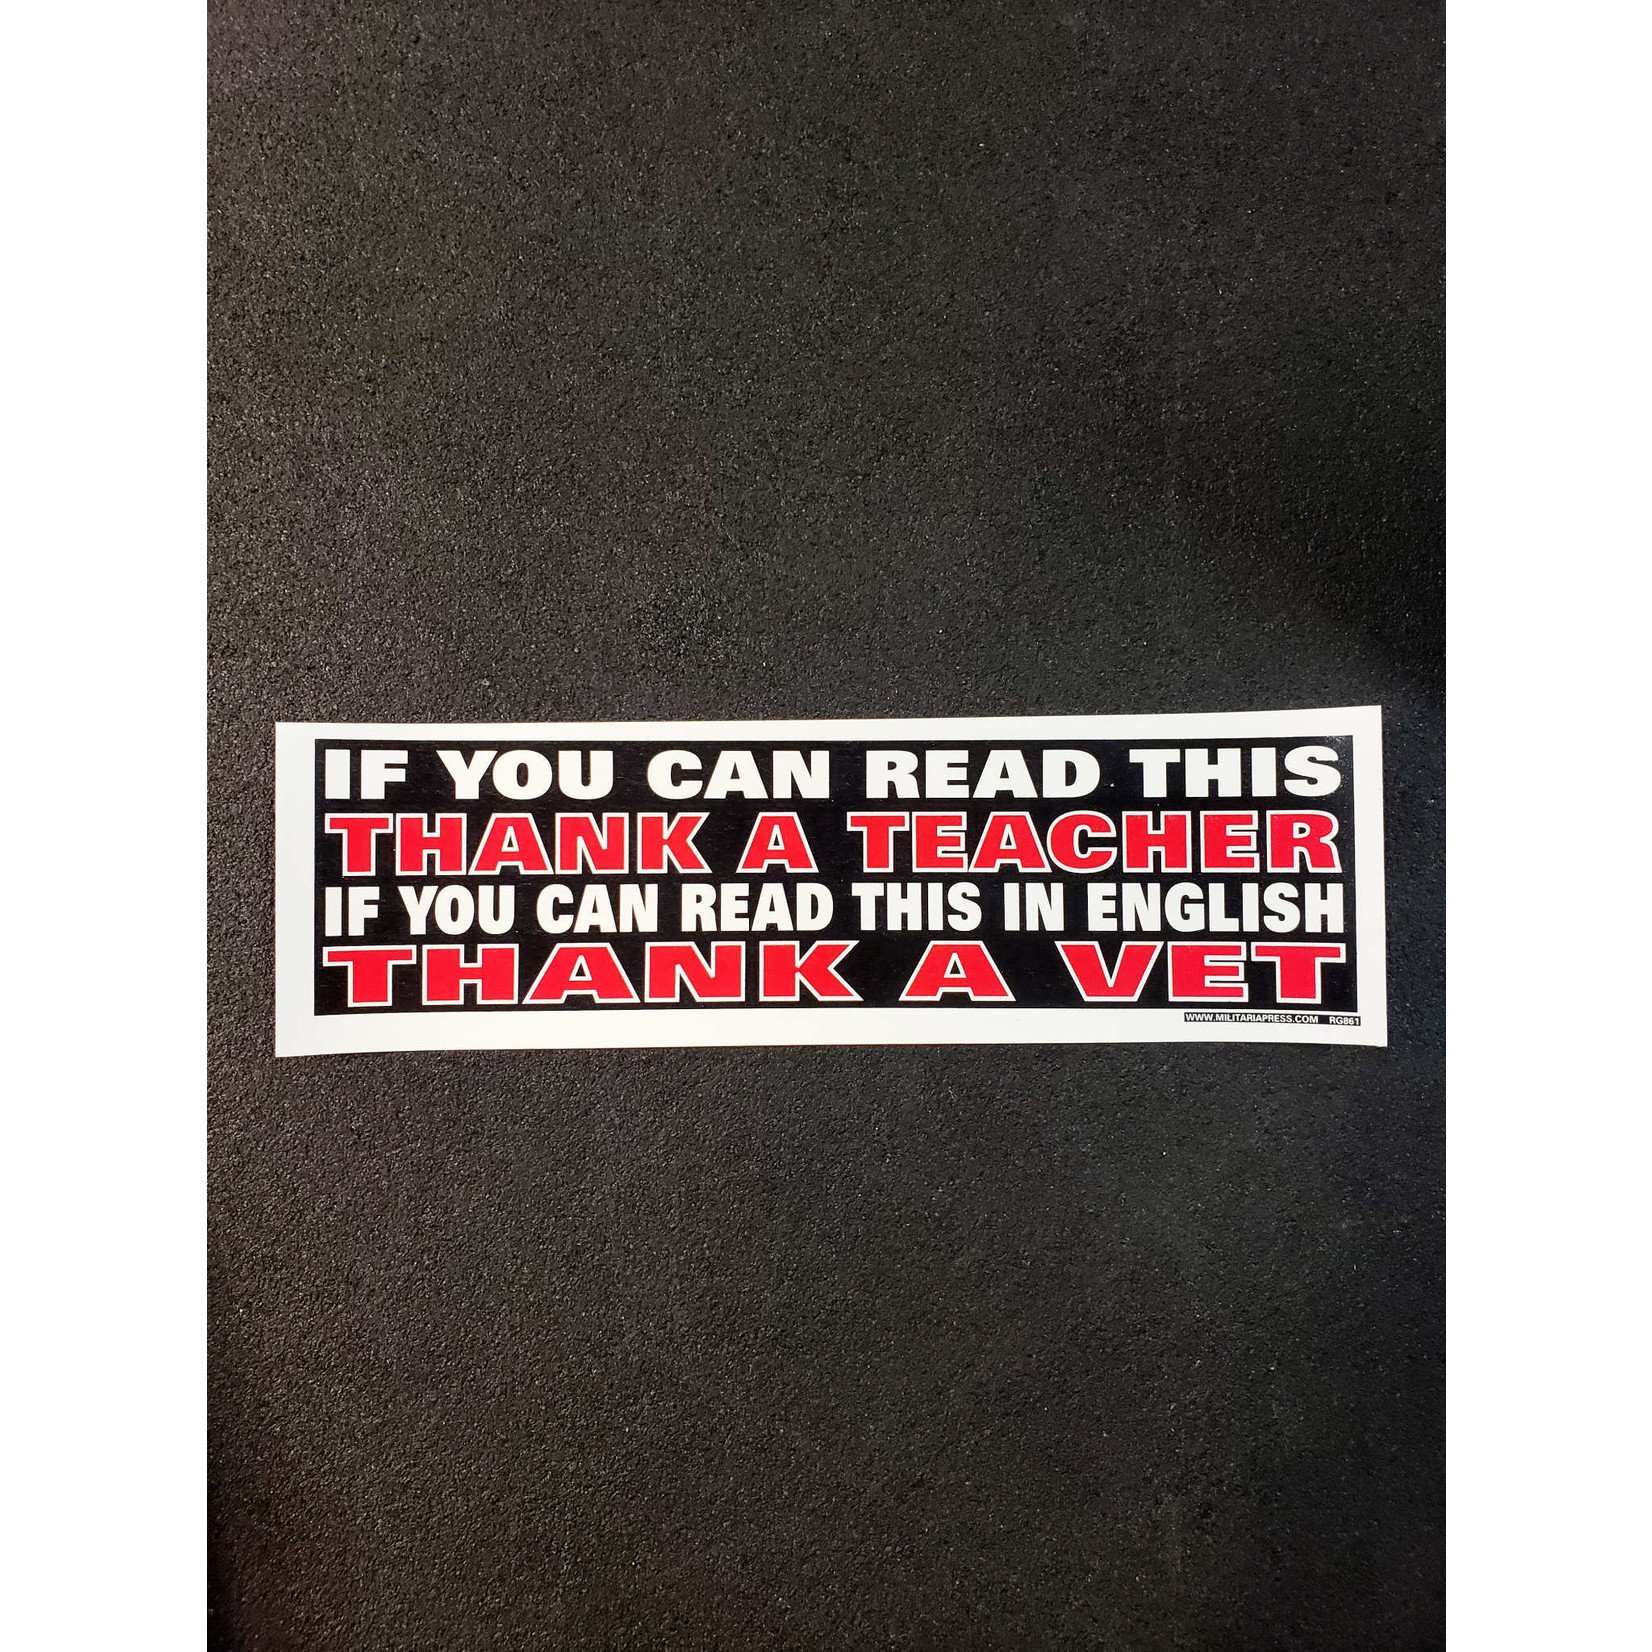 BUMPER STICKER: IF YOU CAN READ THIS